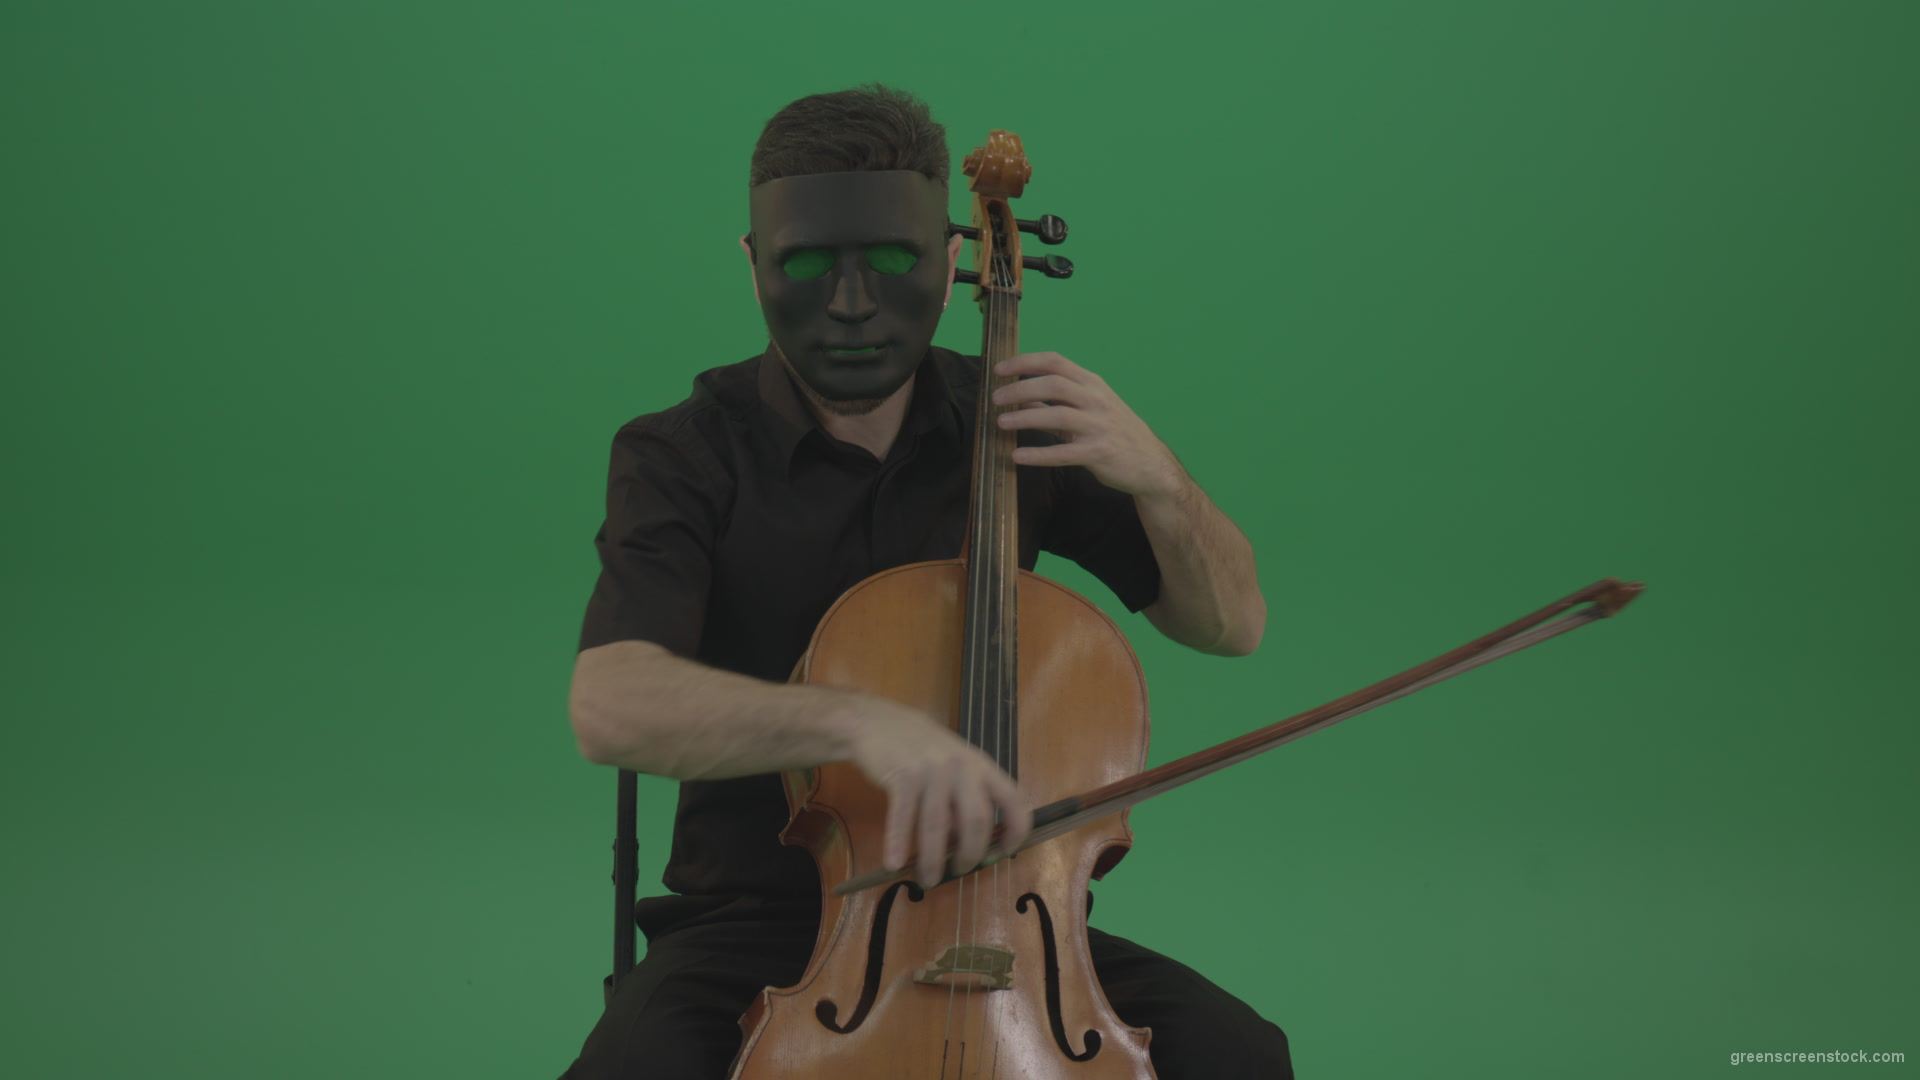 Gothic-Man-in-black-mask-playing-violoncello-cello-strings-music-instrument-isolated-on-green-screen_006 Green Screen Stock